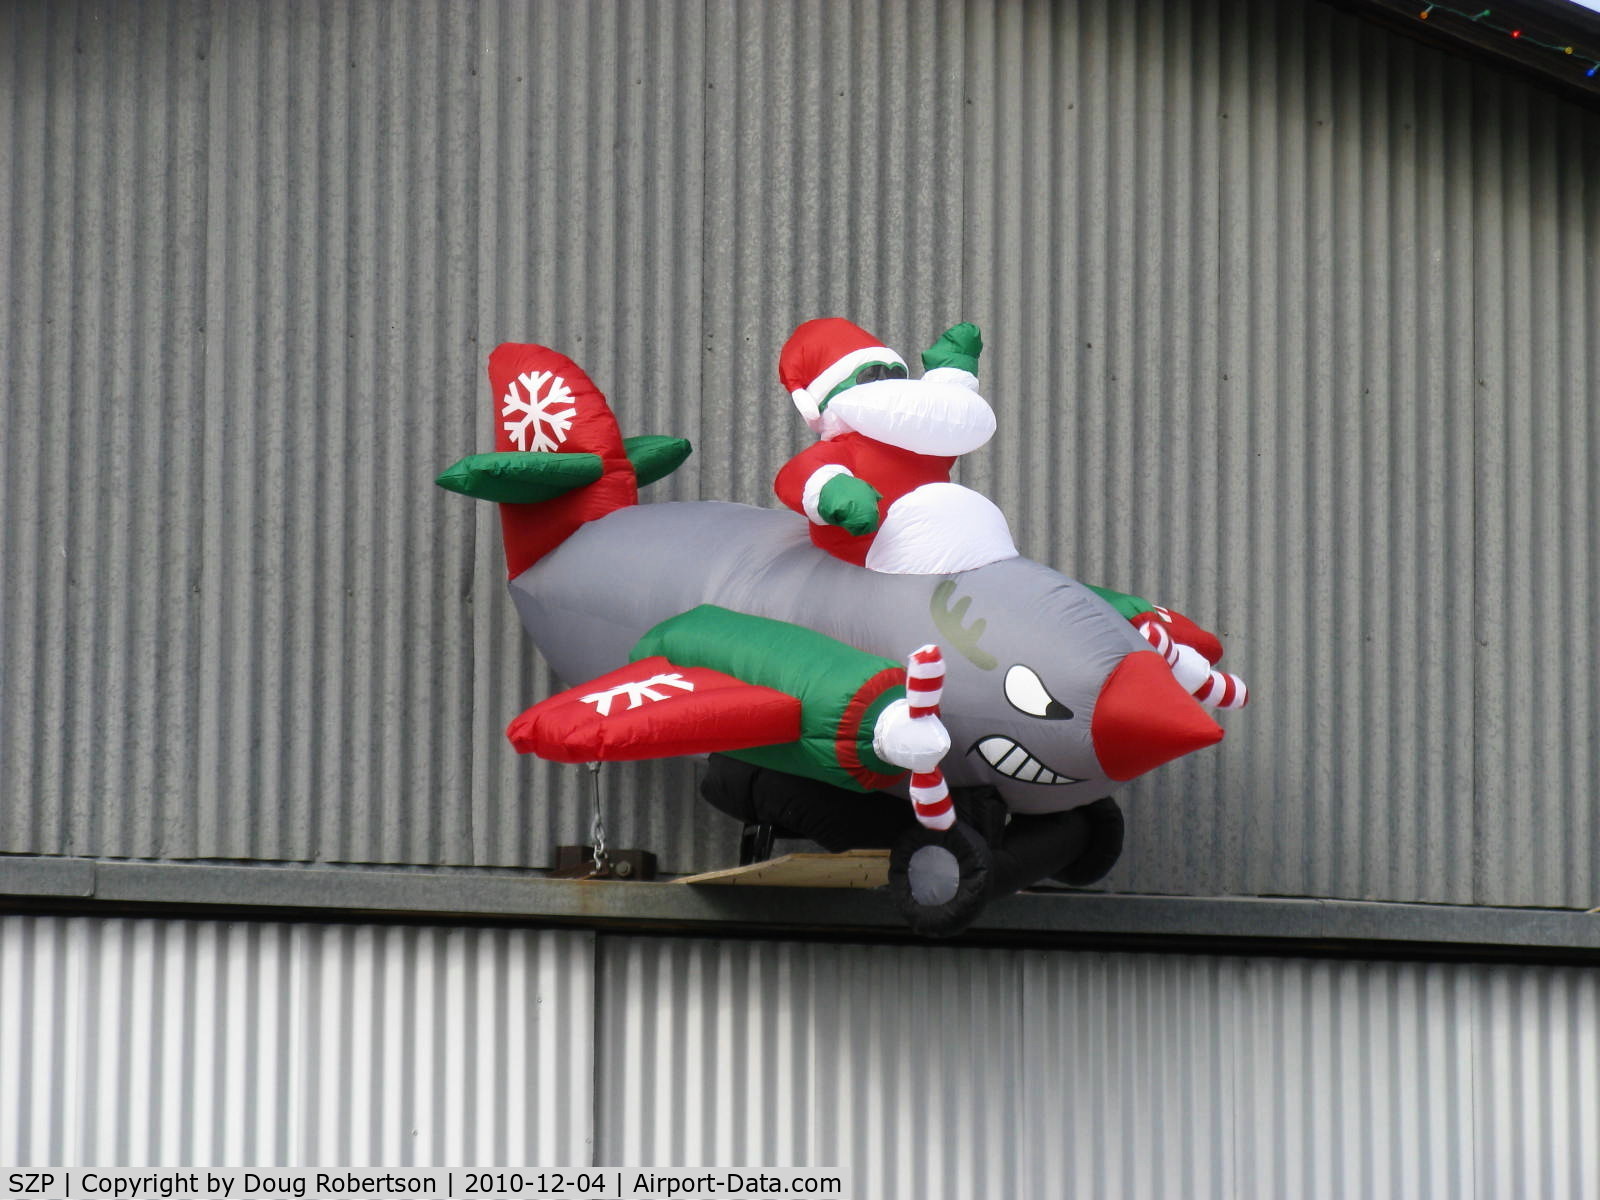 Santa Paula Airport (SZP) - Santa Claus' Flight Turning & Burning at 2 TAXI, (twin engine for reliability-the props are turning in the wind), closeup